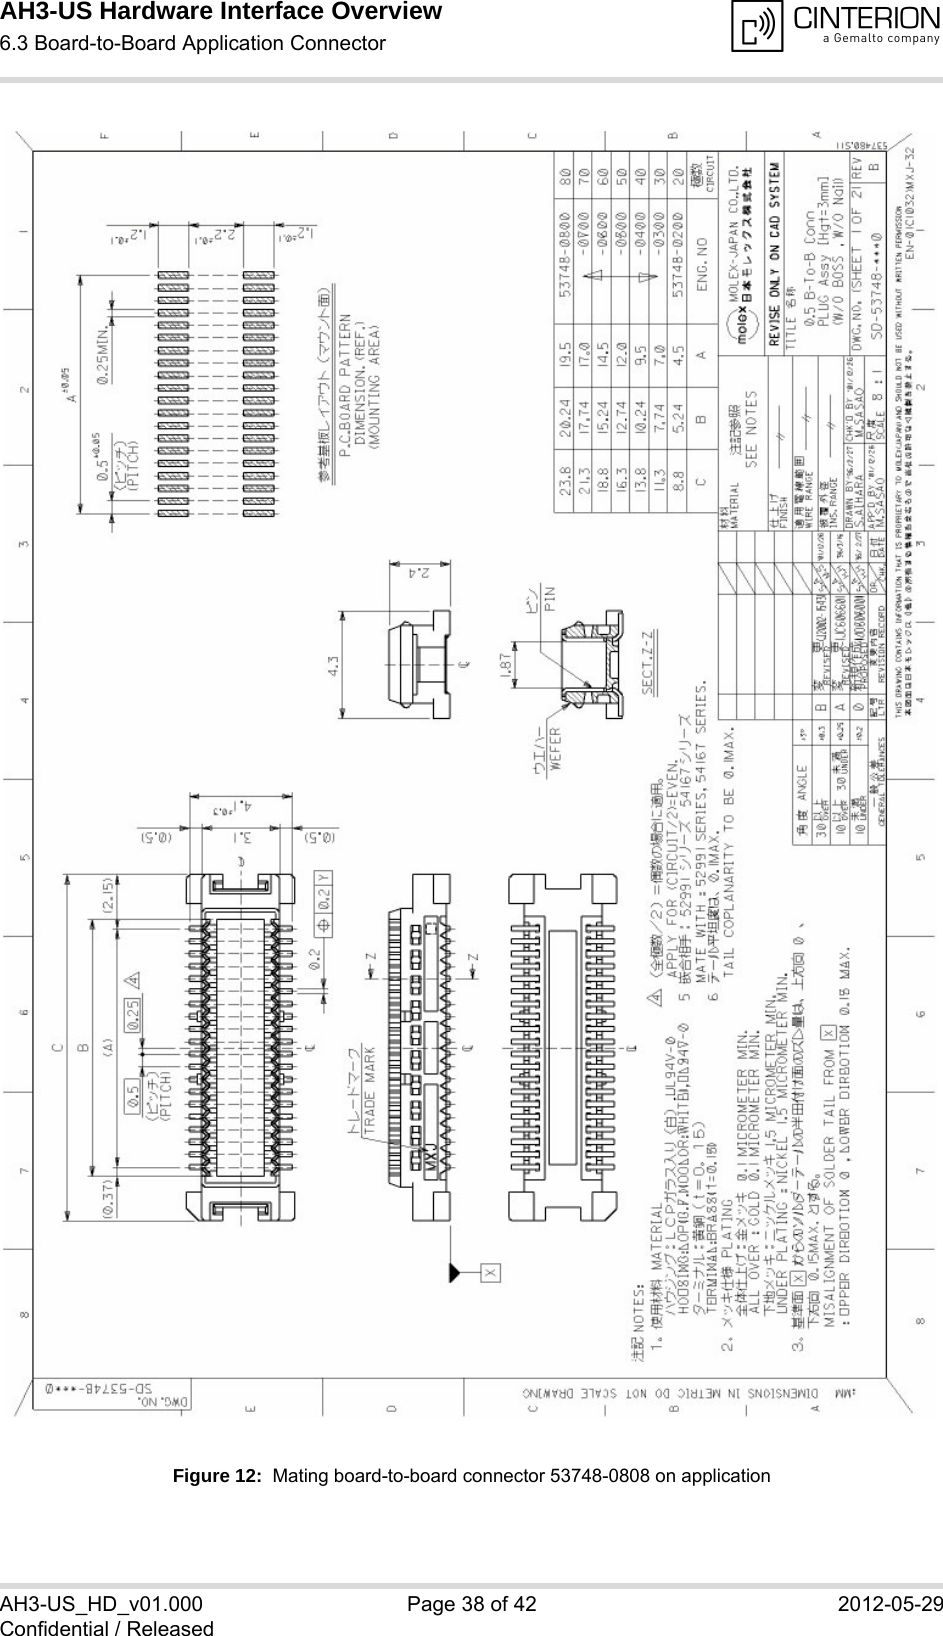 AH3-US Hardware Interface Overview6.3 Board-to-Board Application Connector38AH3-US_HD_v01.000 Page 38 of 42 2012-05-29Confidential / ReleasedFigure 12:  Mating board-to-board connector 53748-0808 on application